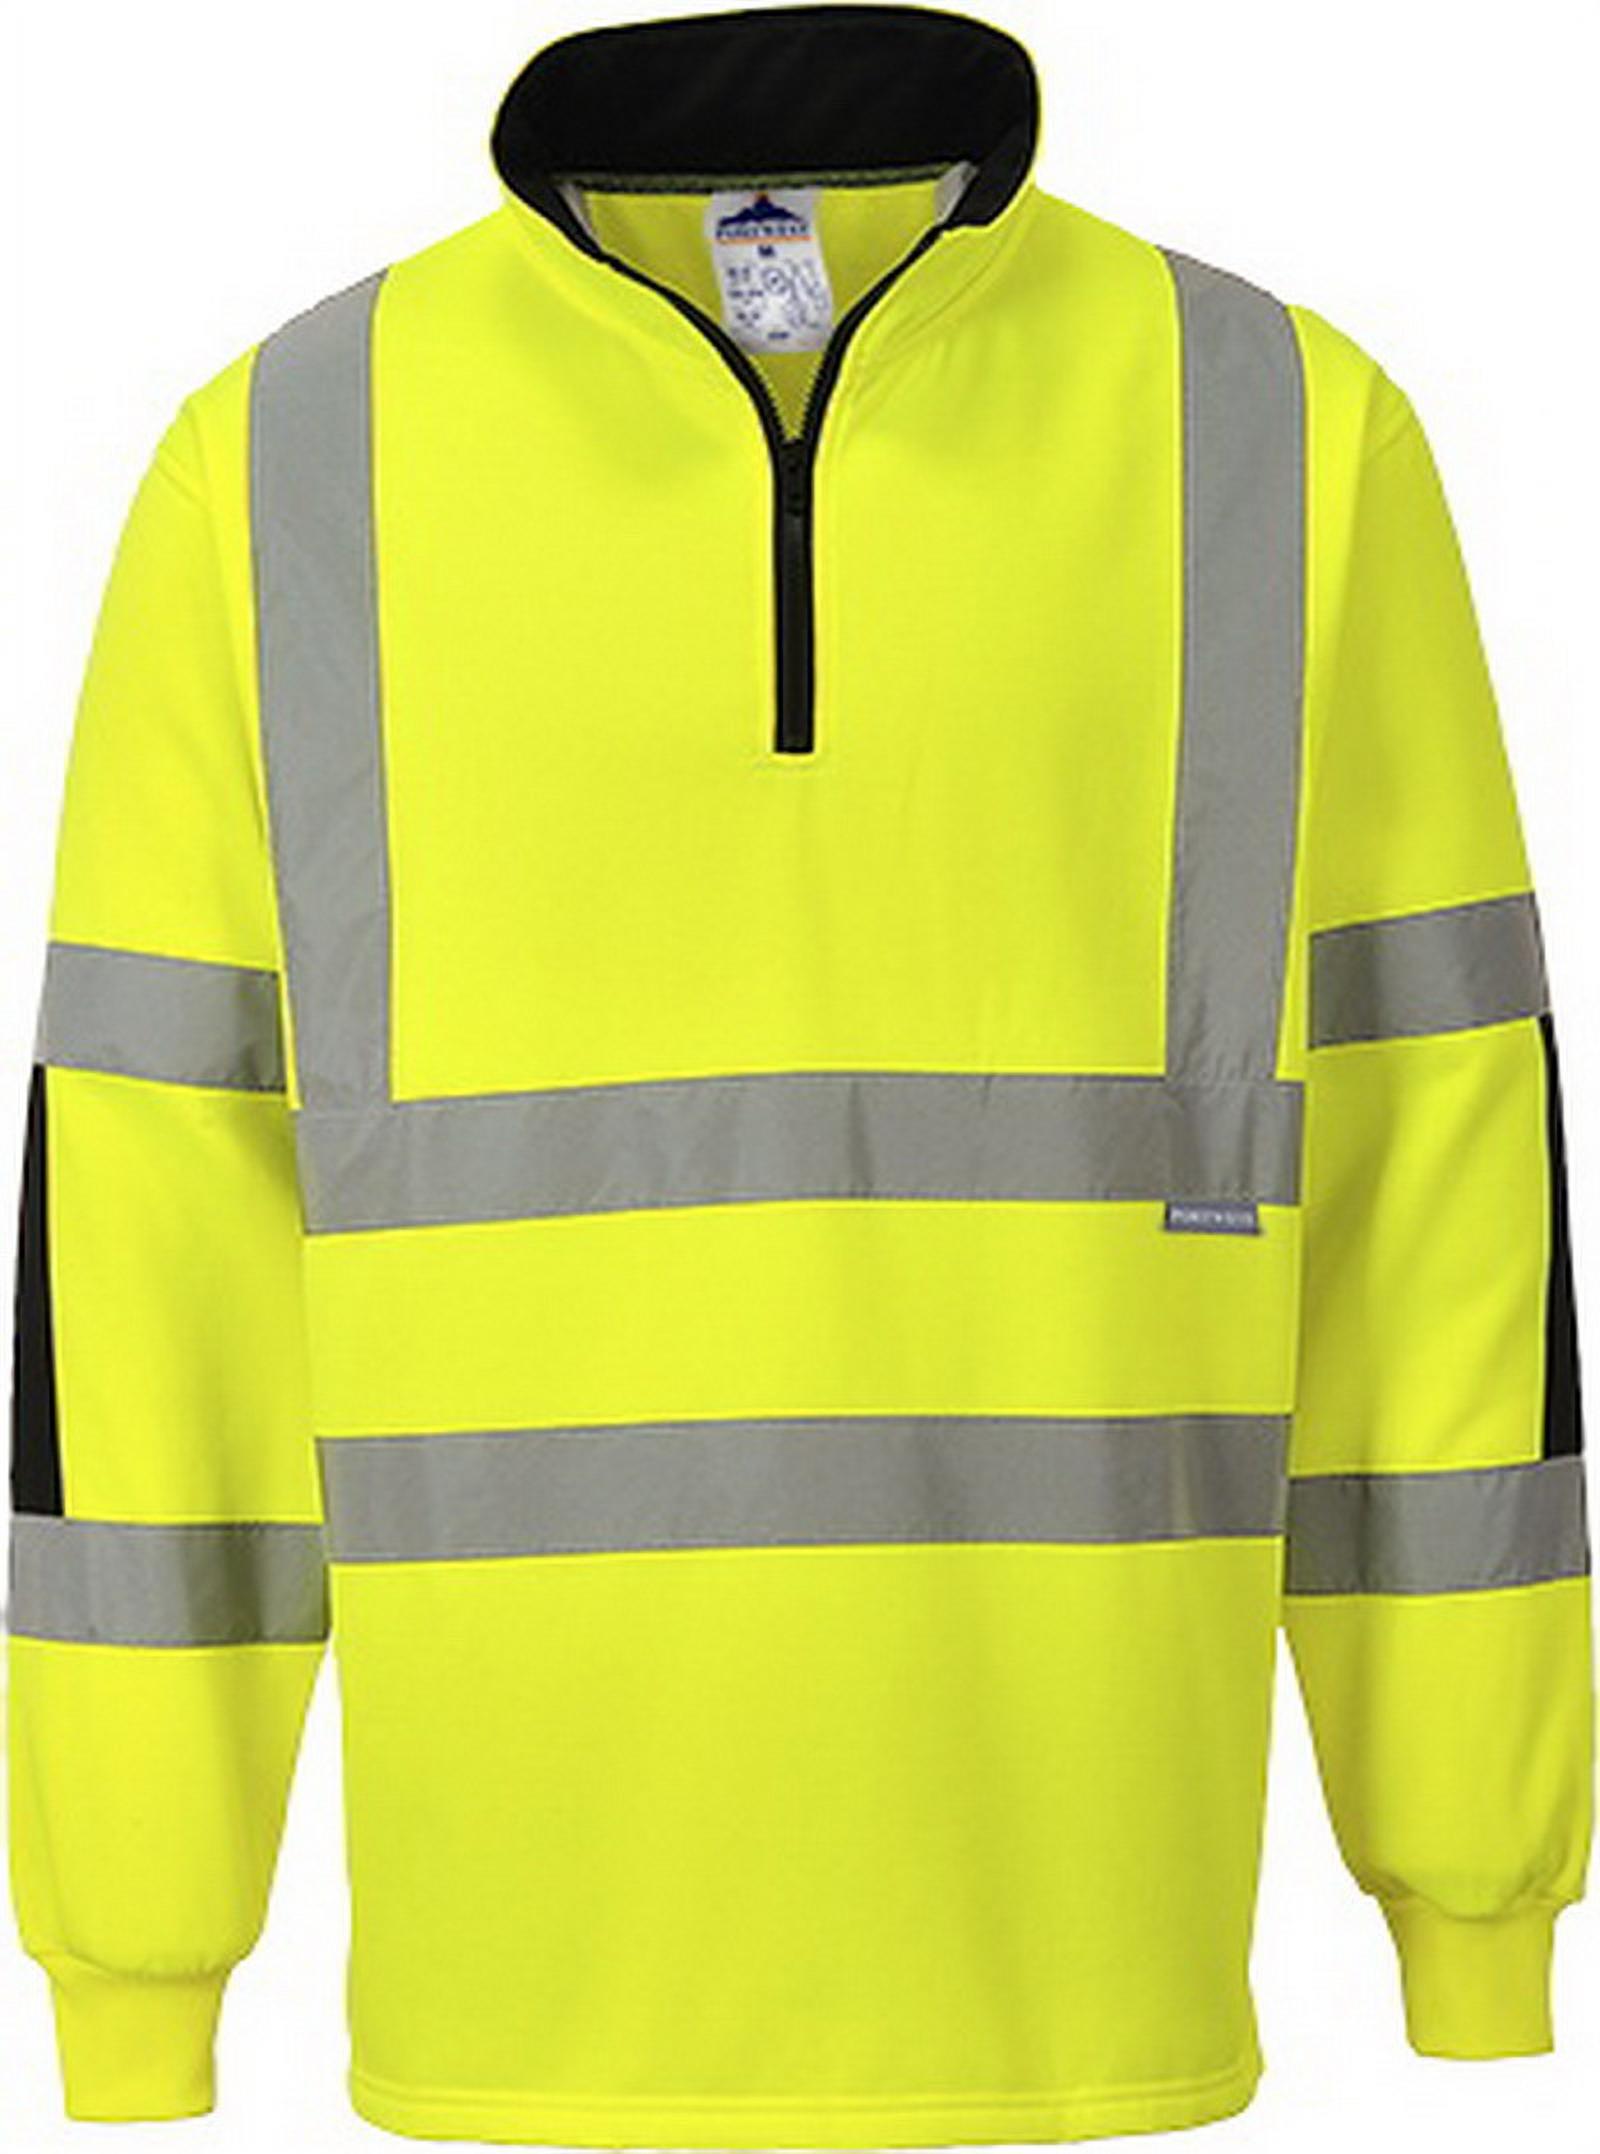 Portwest B308 Xenon Rugby Sweatshirt-Yellow-M - image 1 of 1